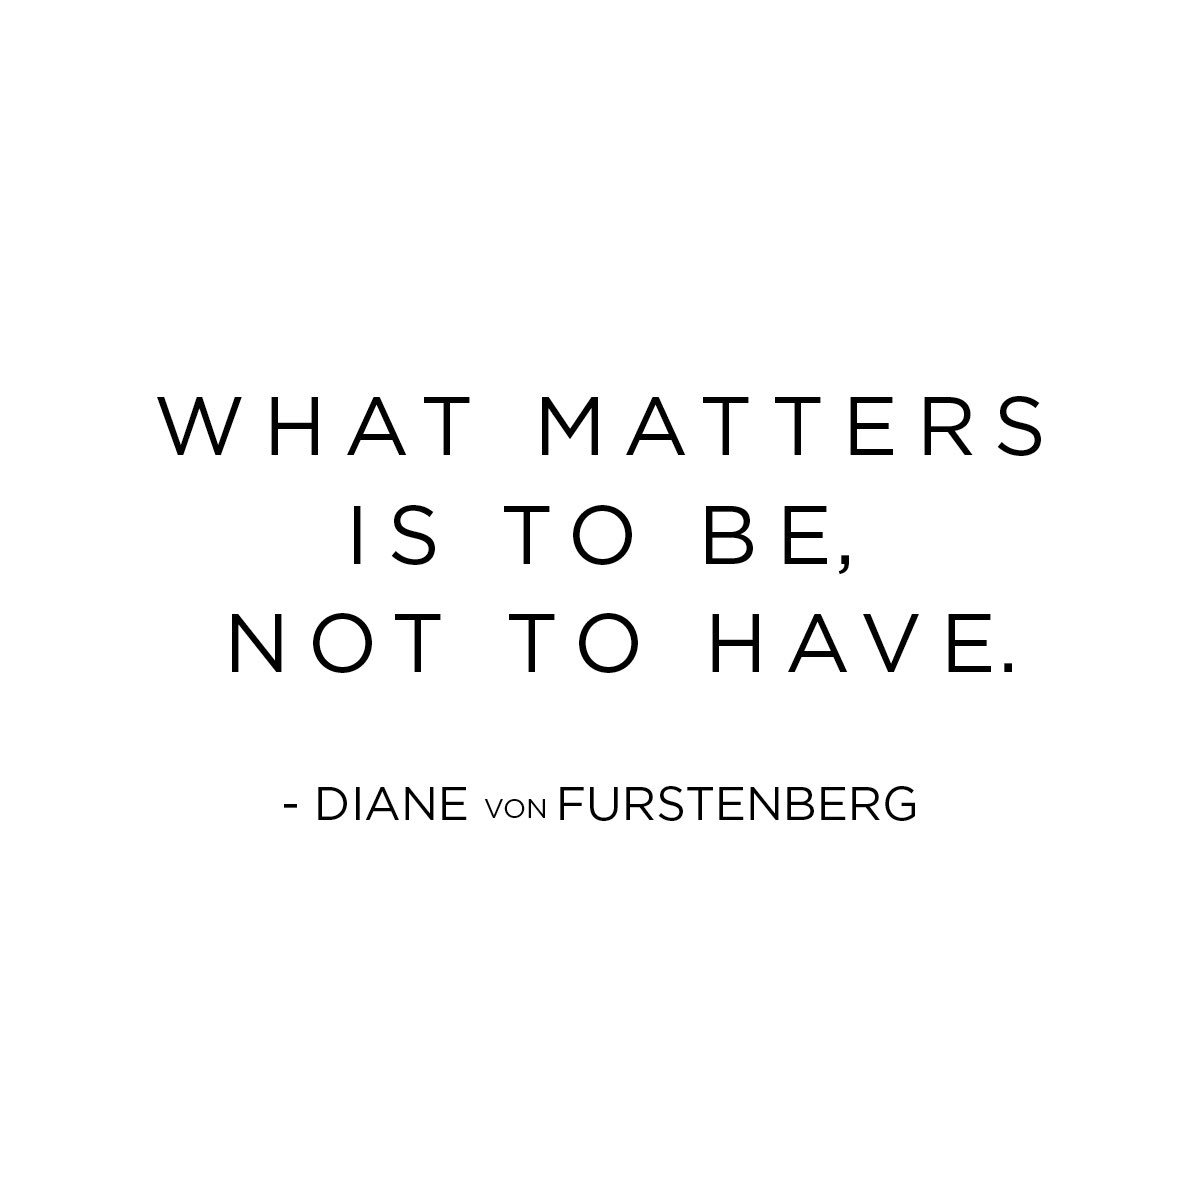 RT @DVF: Putting things into perspective as we start a new week. #inspiration #quotes https://t.co/p5n9MN6Ehm